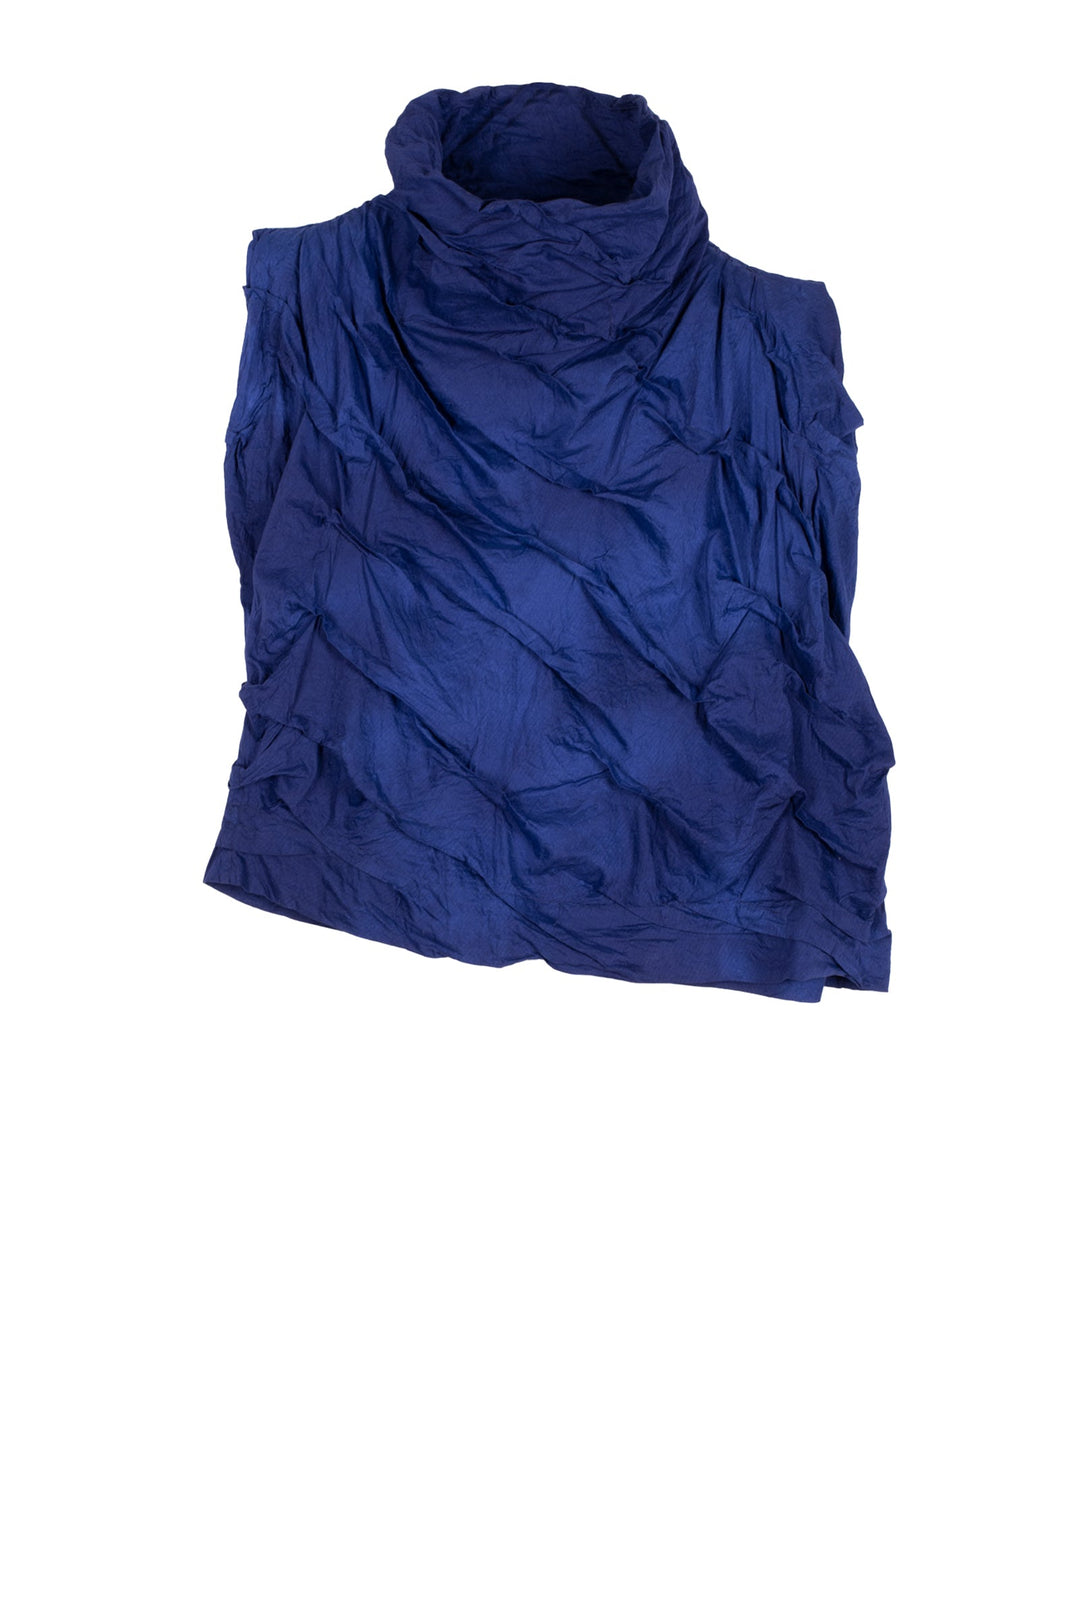 DYED COTTON SILK HEAVY VOILE WAVY TUCK SHELL TOP - dh1553-blu -